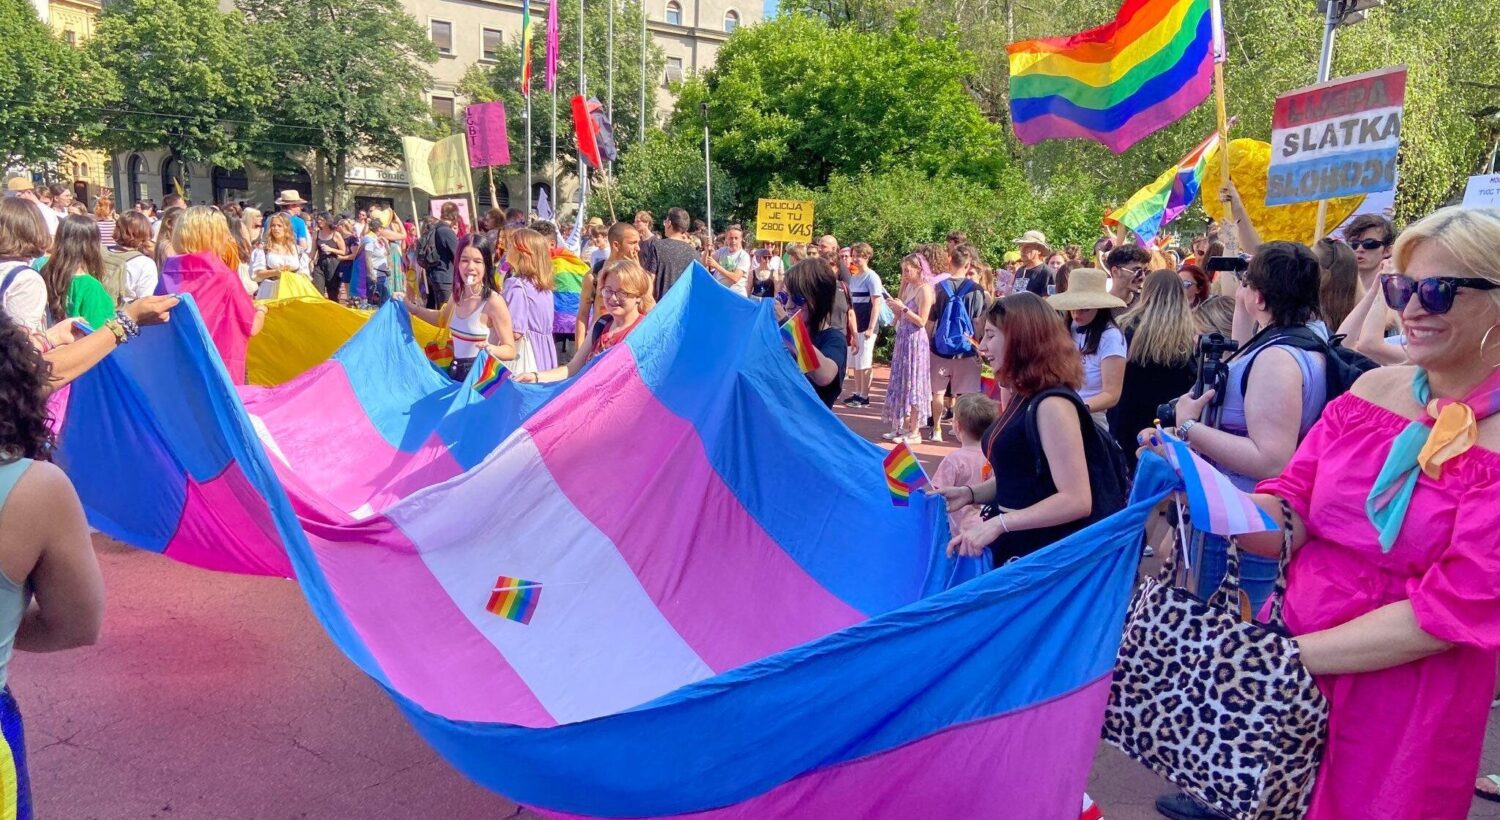 Trans Mreža Balkan, Empowering and Connecting Trans Groups in the Balkans